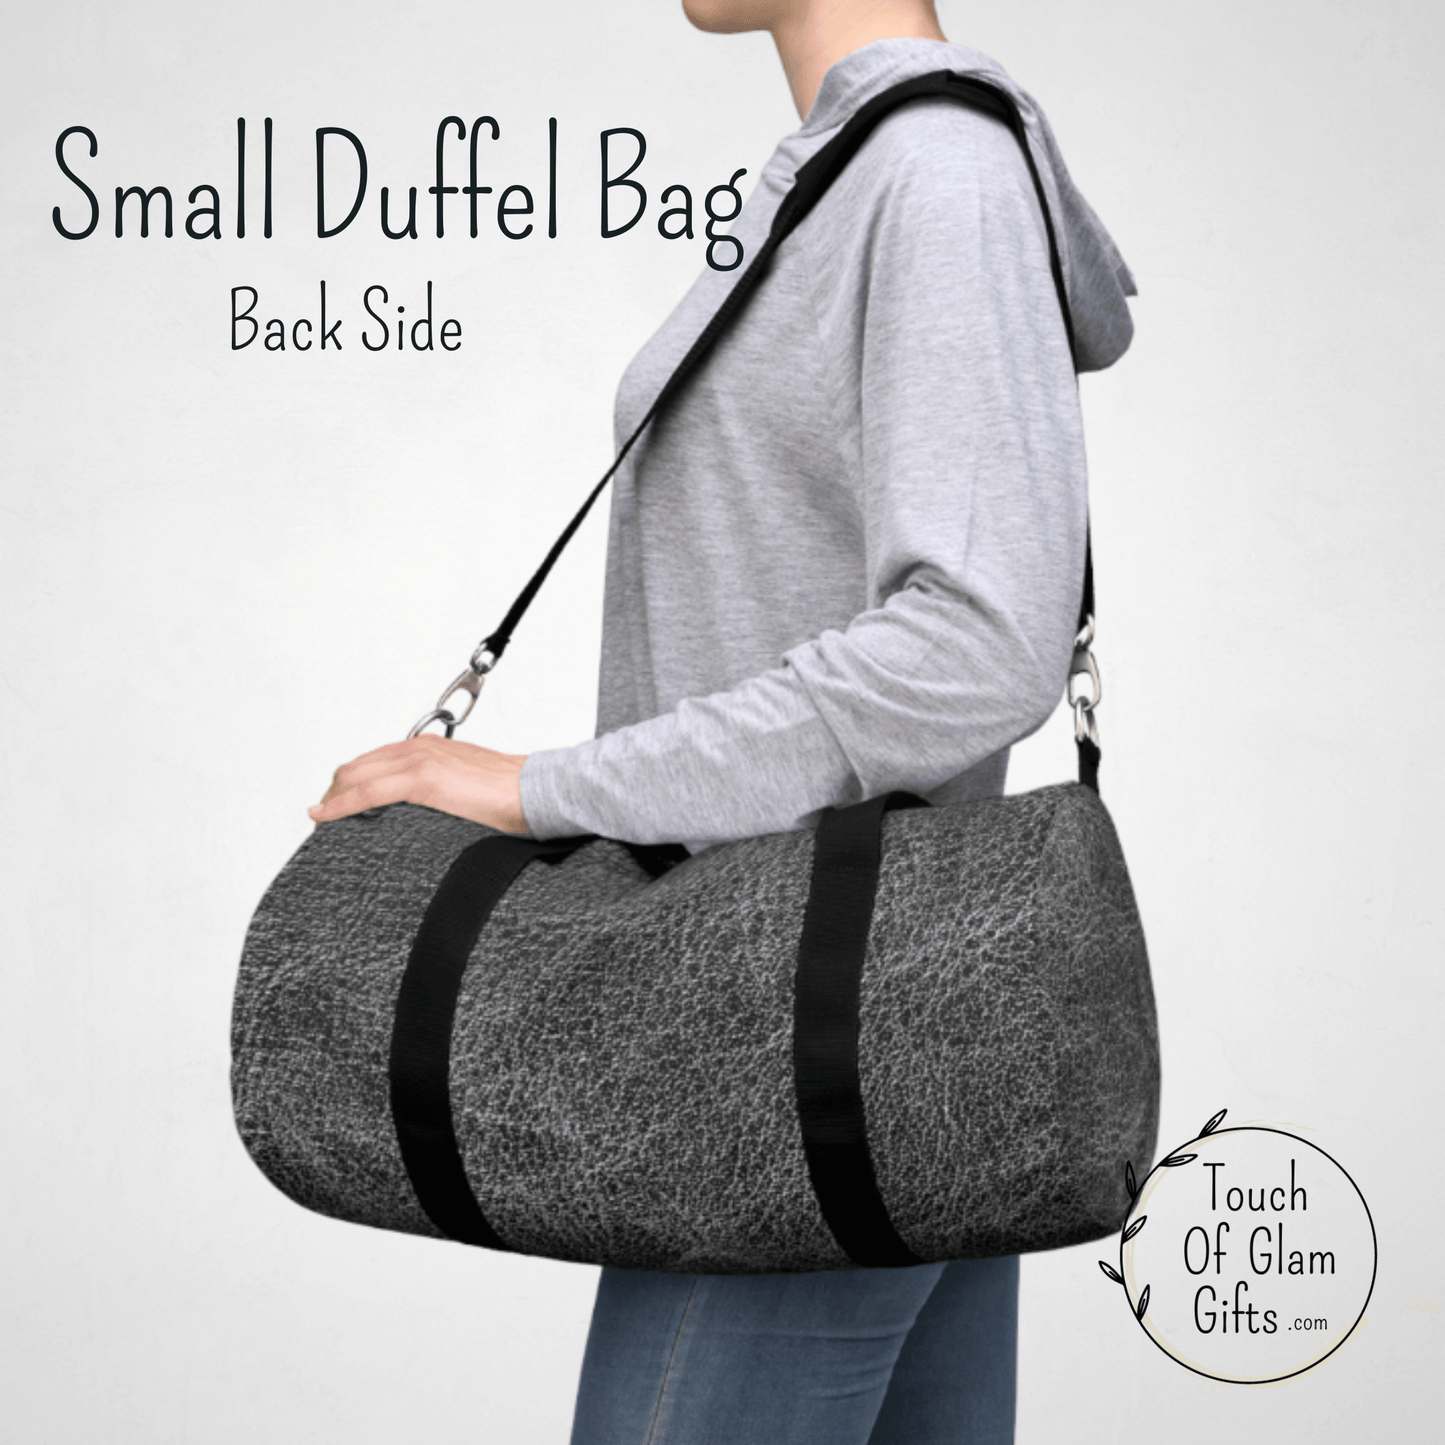 Our small mens duffel bag is shown on a female model to show the size. Perfect for a weekend bag or large purse.